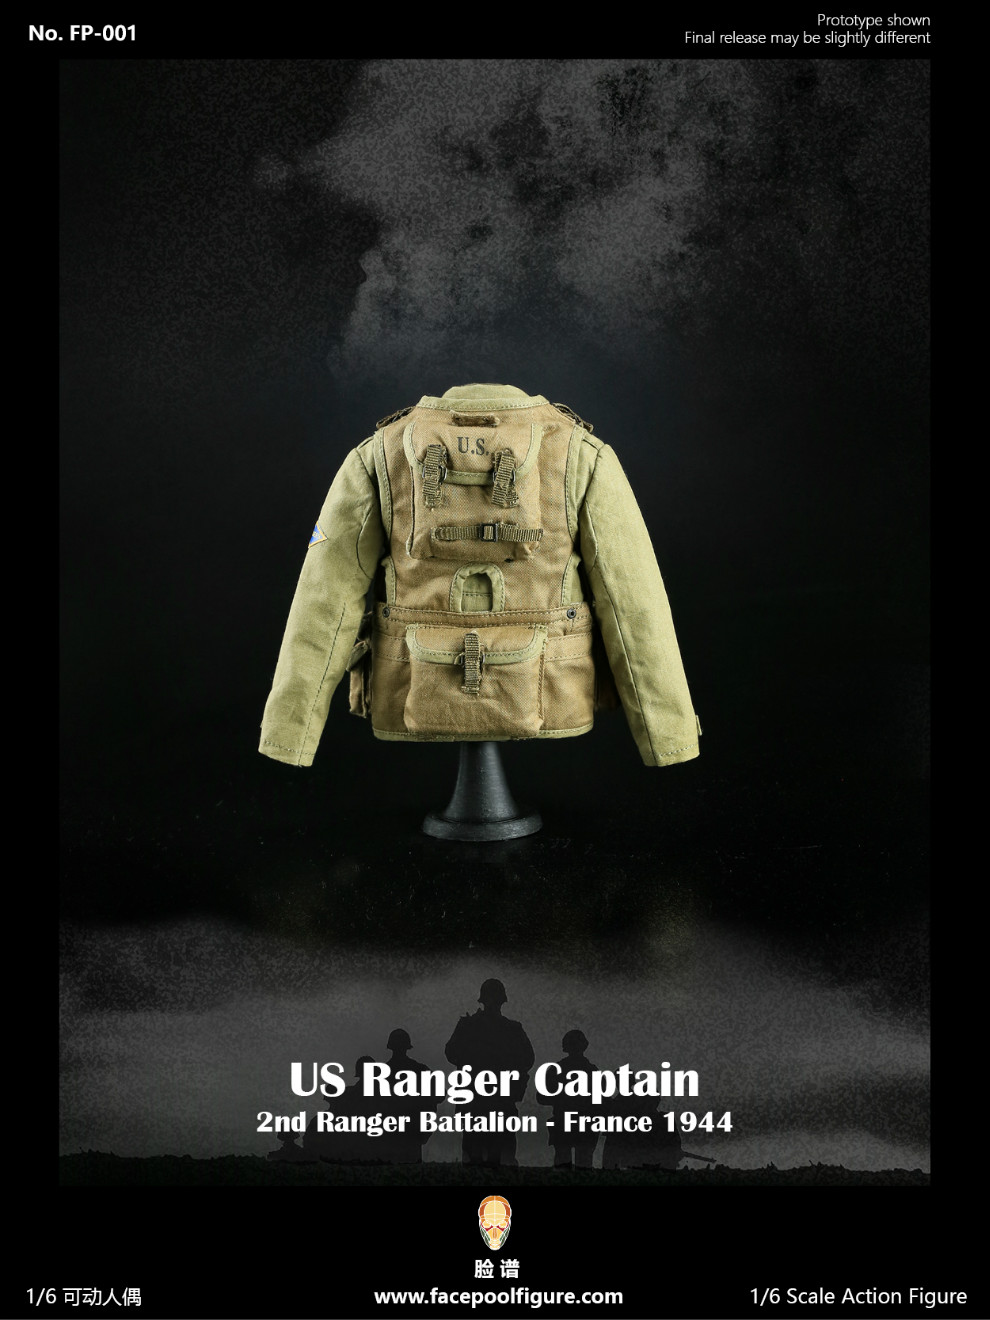 WWII - NEW PRODUCT: update notice Facepool: 1/6 WWII US RANGER CAPTAIN World War II US Rangers Captain - Anniversary 23224211